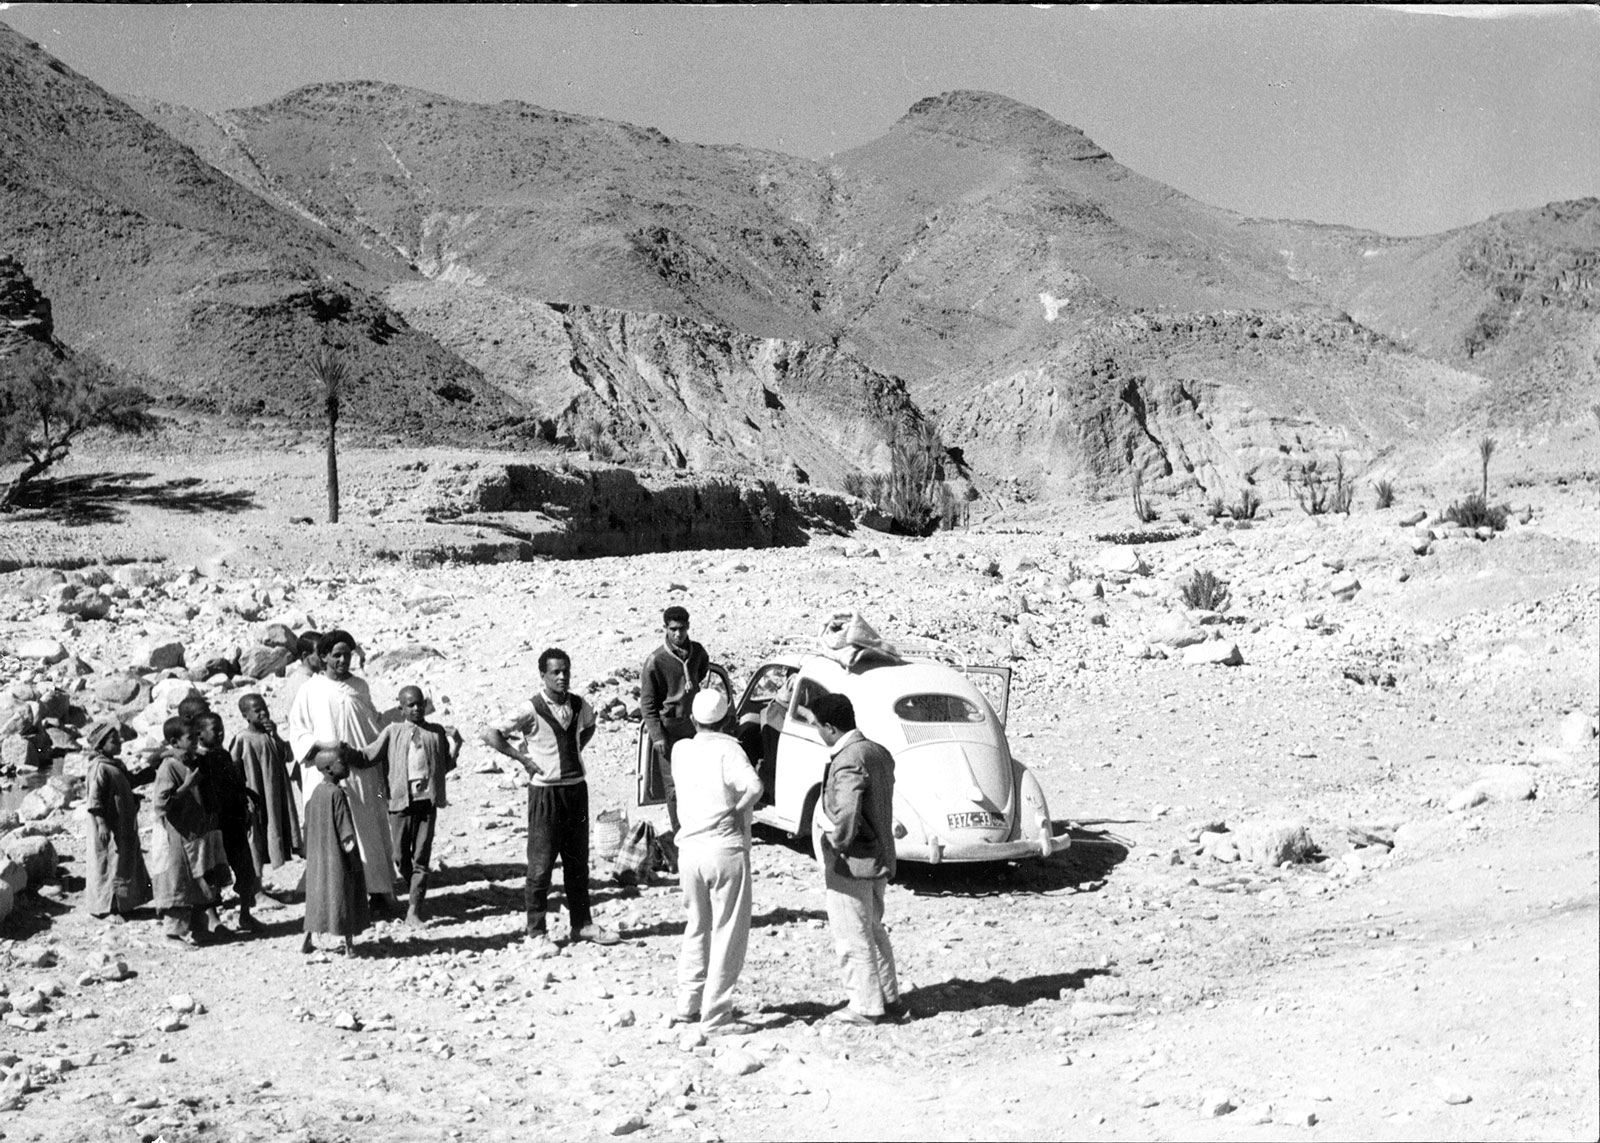 Paul Bowles's VW bug stopped along a mountain road in Morocco, 1959